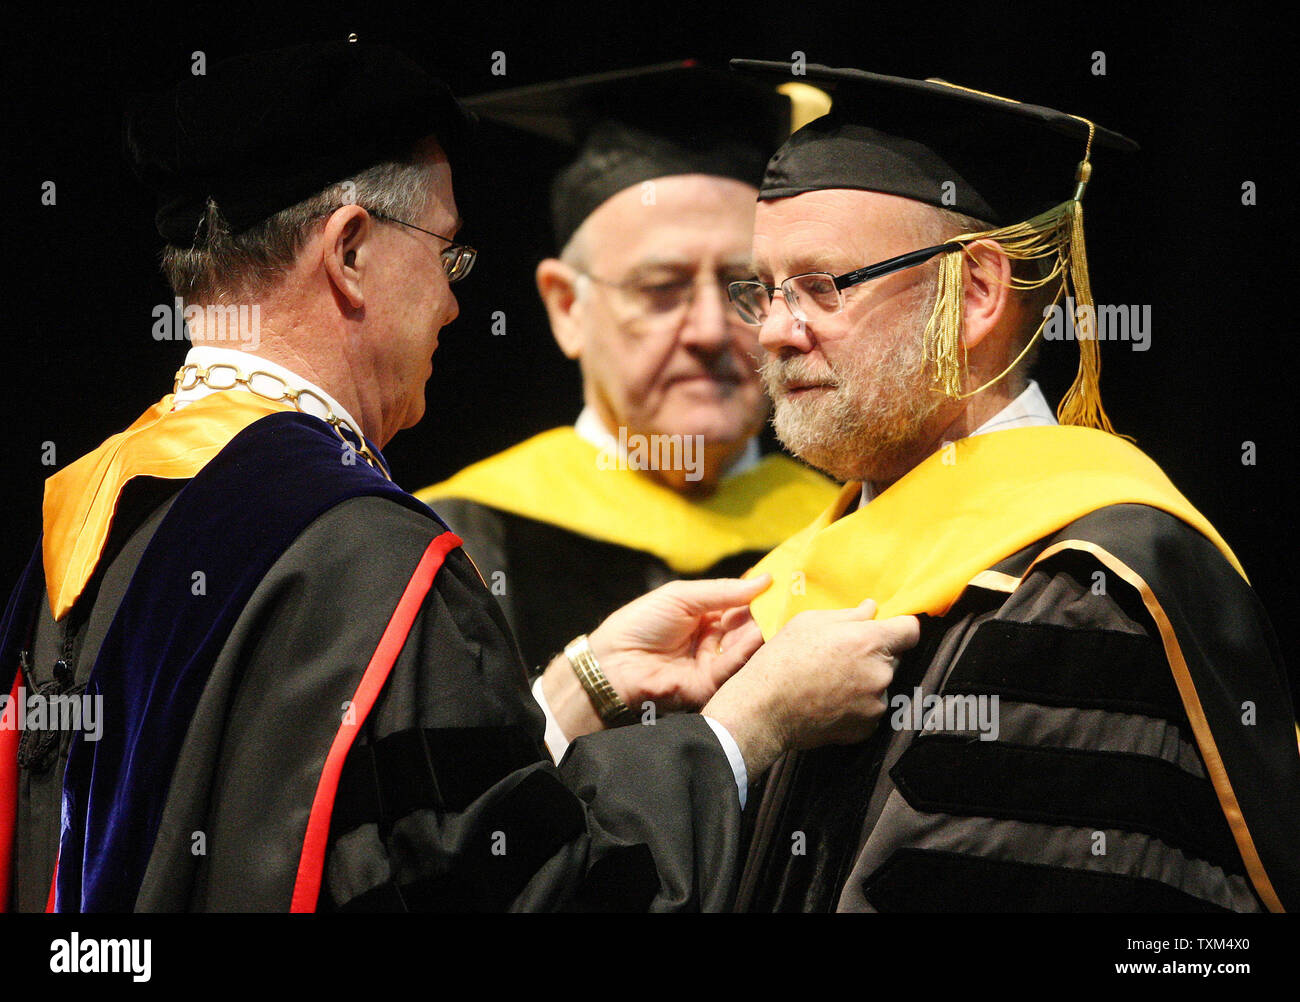 Sir Ian Wilmut, best known for leading a team of scientists to produce the first mammal cloned with genetic material from an adult cell (R) receives a hood from Chancellor Brady Deaton at Commencement Honors Convocation ceremonies at the University of Missouri in Columbia, Missouri on May 14, 2011. Wilmut, who named the sheep 'Dolly'  in 1996 after singer Dolly Parton, says the birth sparked debate about the ethics of cloning. Wilmut was awarded a Doctor of Science Honorary Degree.  UPI/Bill Greenblatt Stock Photo